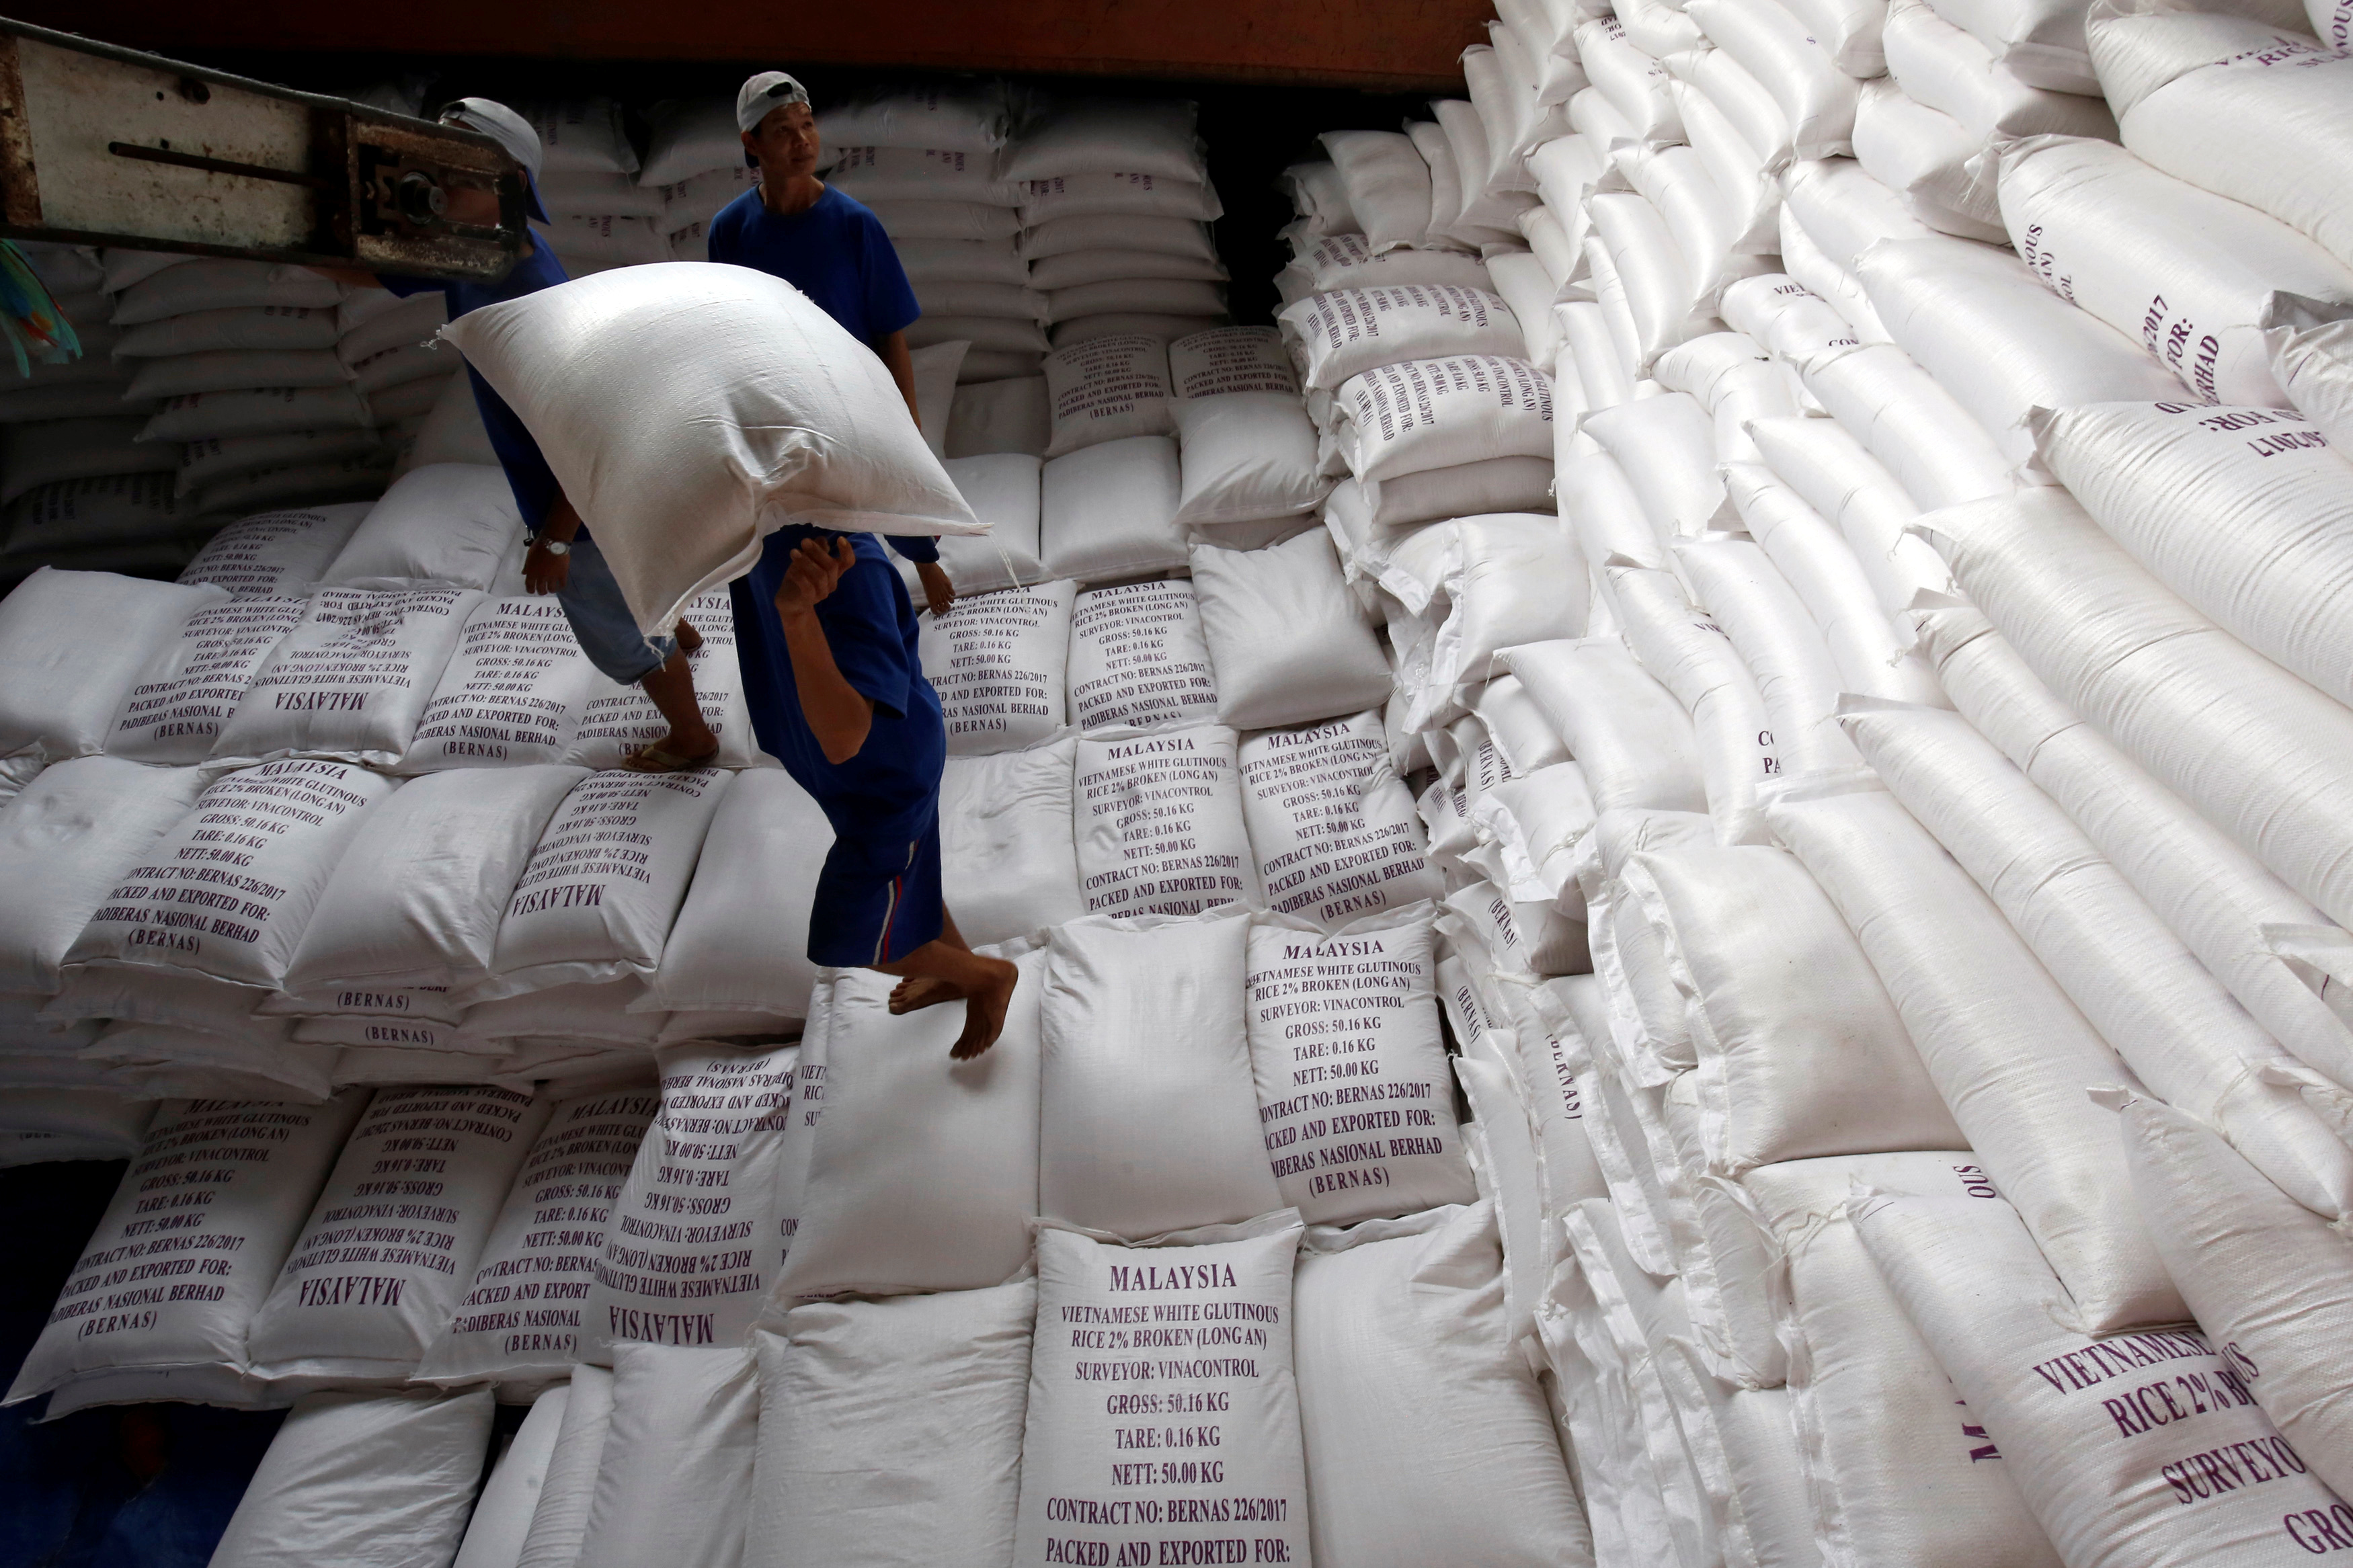 Men load rice bags to a ship for export at a rice processing factory in Vietnam's southern Mekong delta